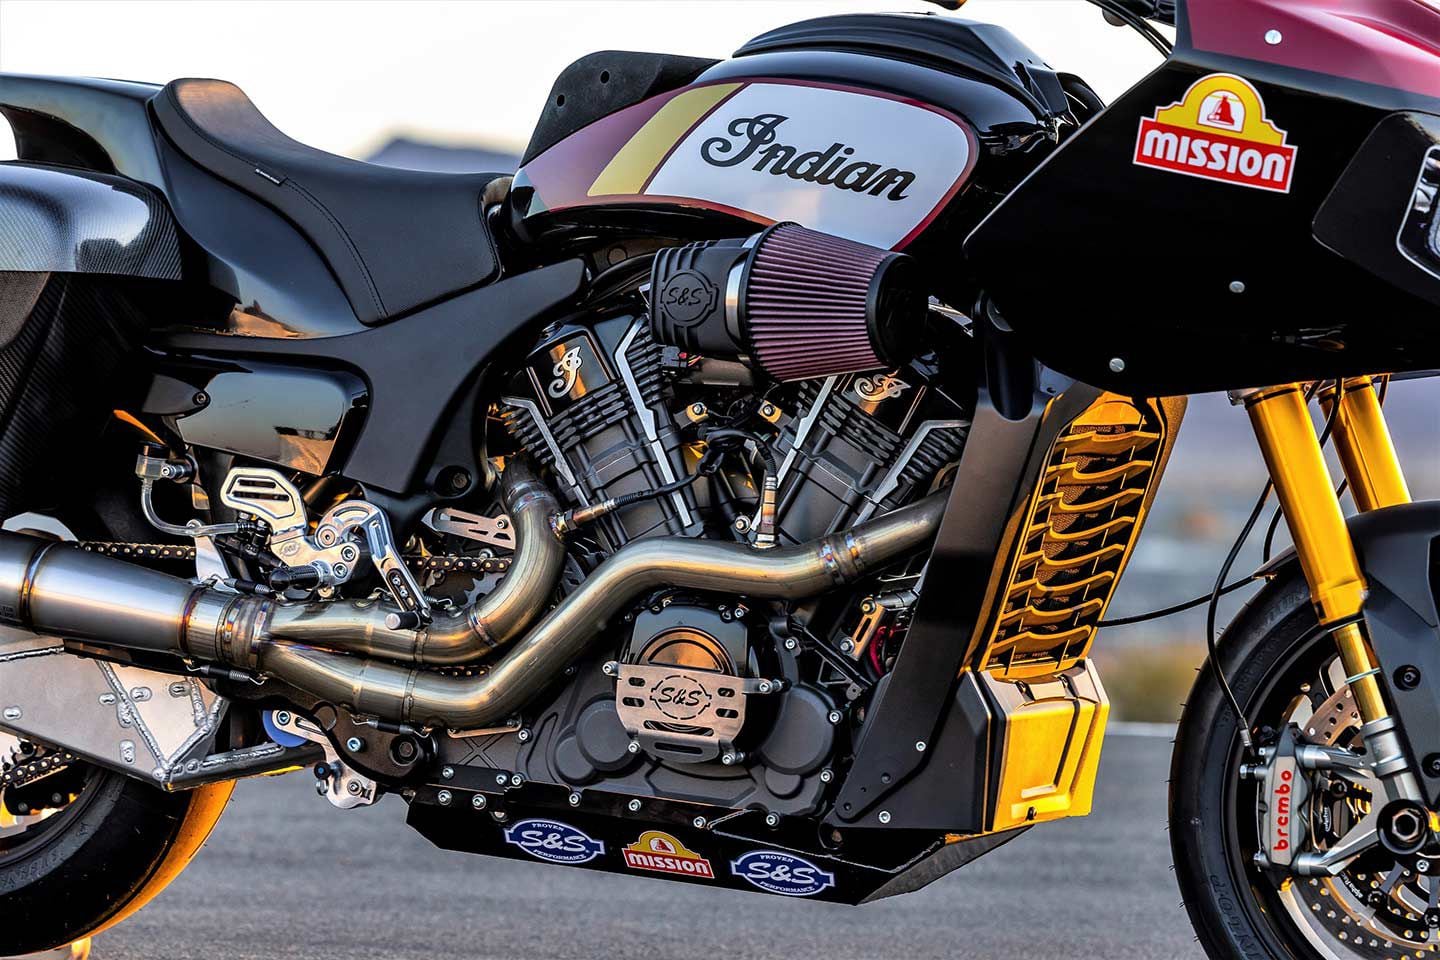 The Challenger RR runs with a heavily modified V-twin that displaces 1,835cc thanks to a 112 CID Big Bore kit. The cylinder heads are CNC ported, with an S&S air intake and 78mm throttle body.